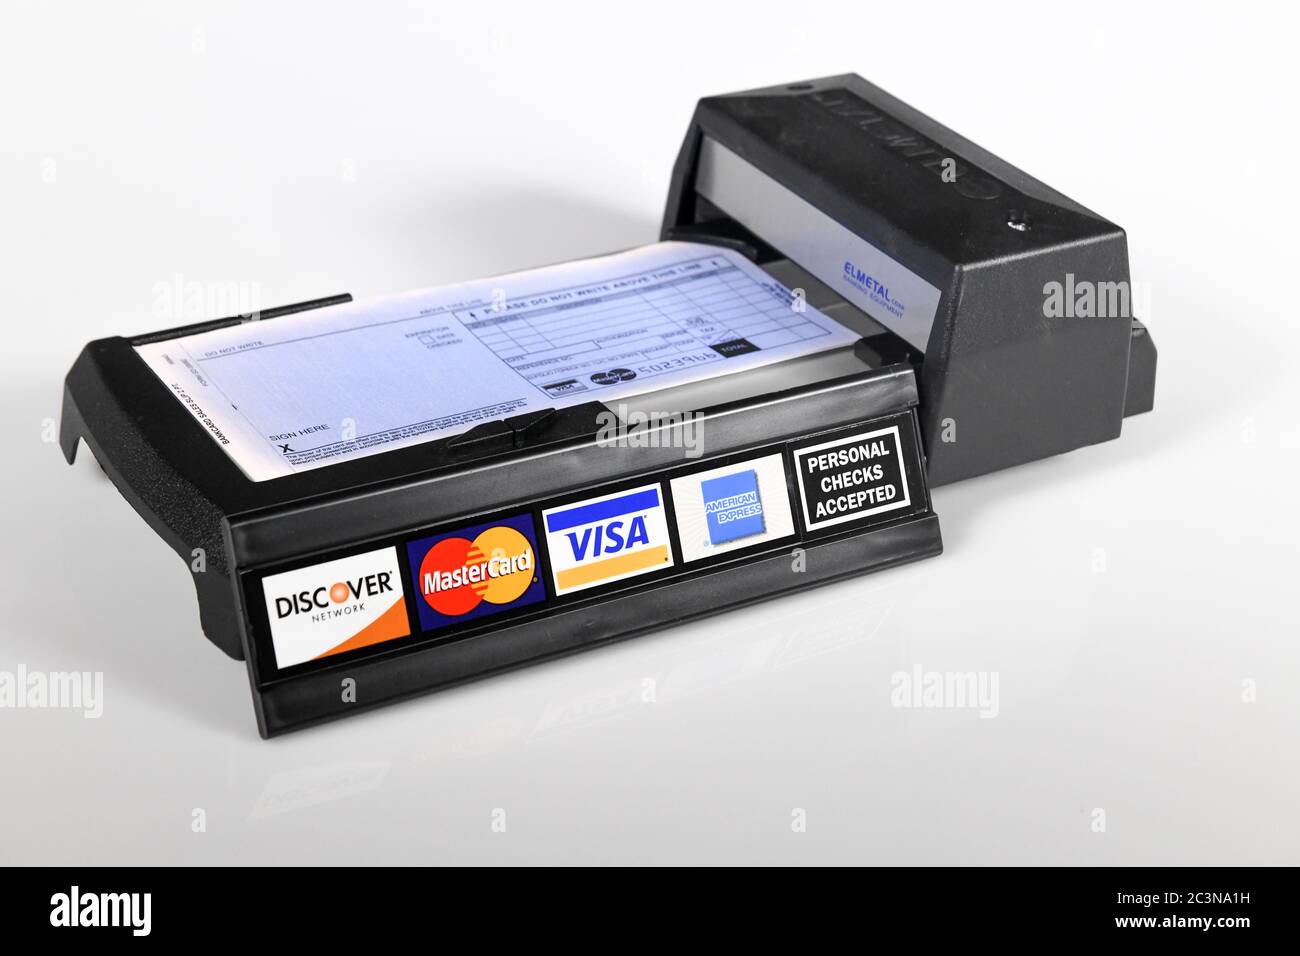 manual-credit-card-machine-old-technology-a-manually-operated-credit-card-imprinter-with-credit-card-logos-personal-check-sign-2C3NA1H.jpg